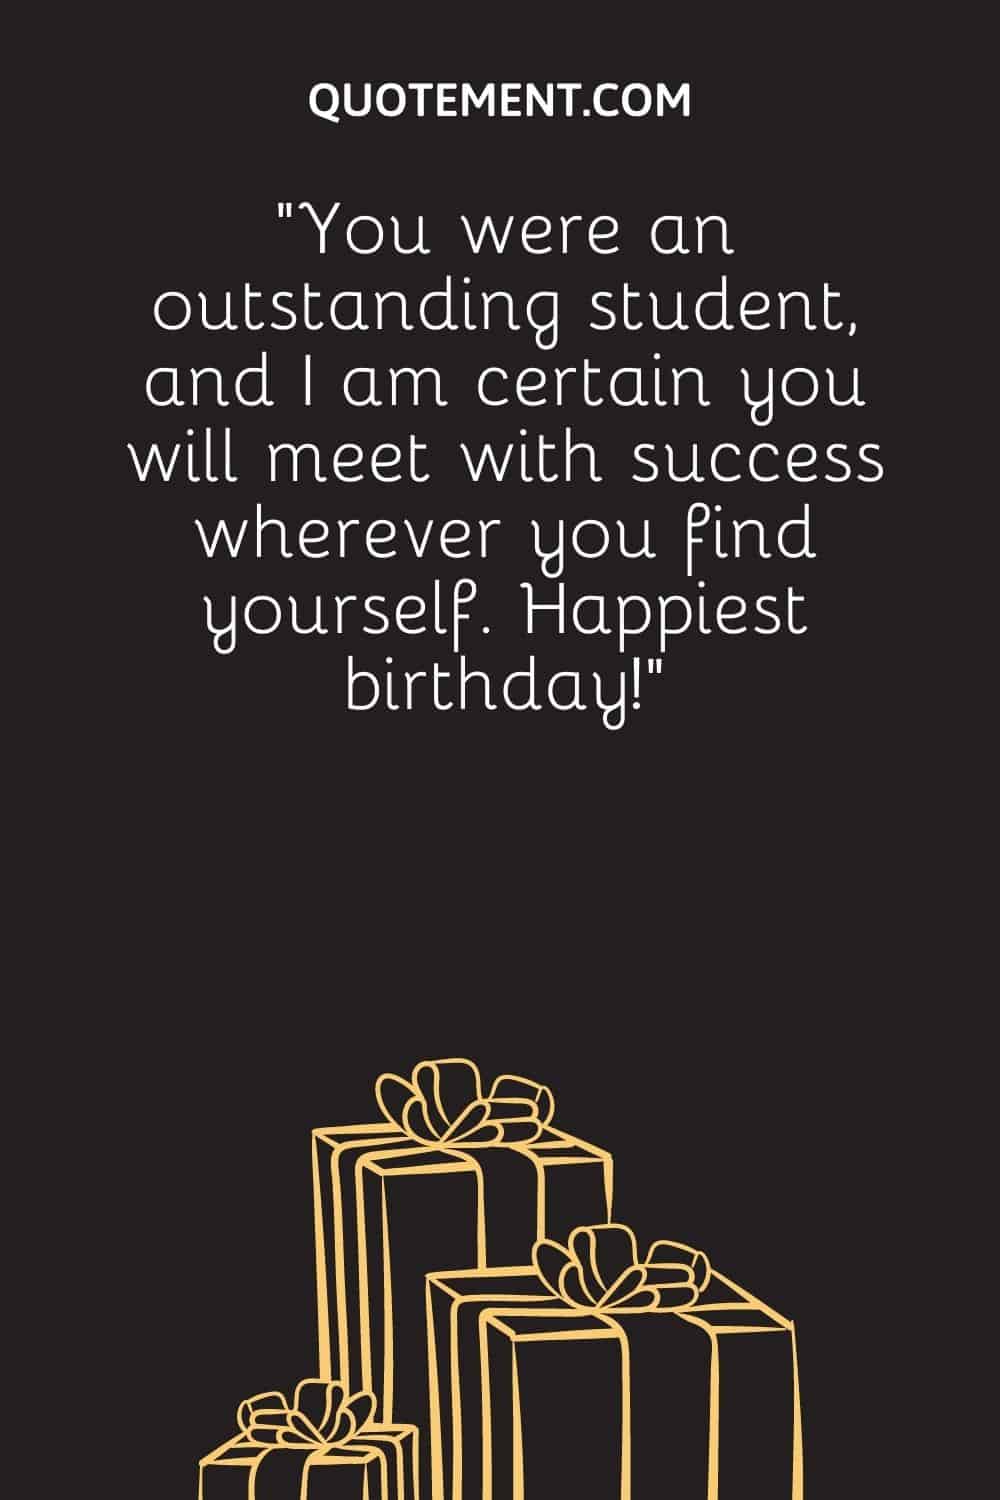 “You were an outstanding student, and I am certain you will meet with success wherever you find yourself. Happiest birthday!”